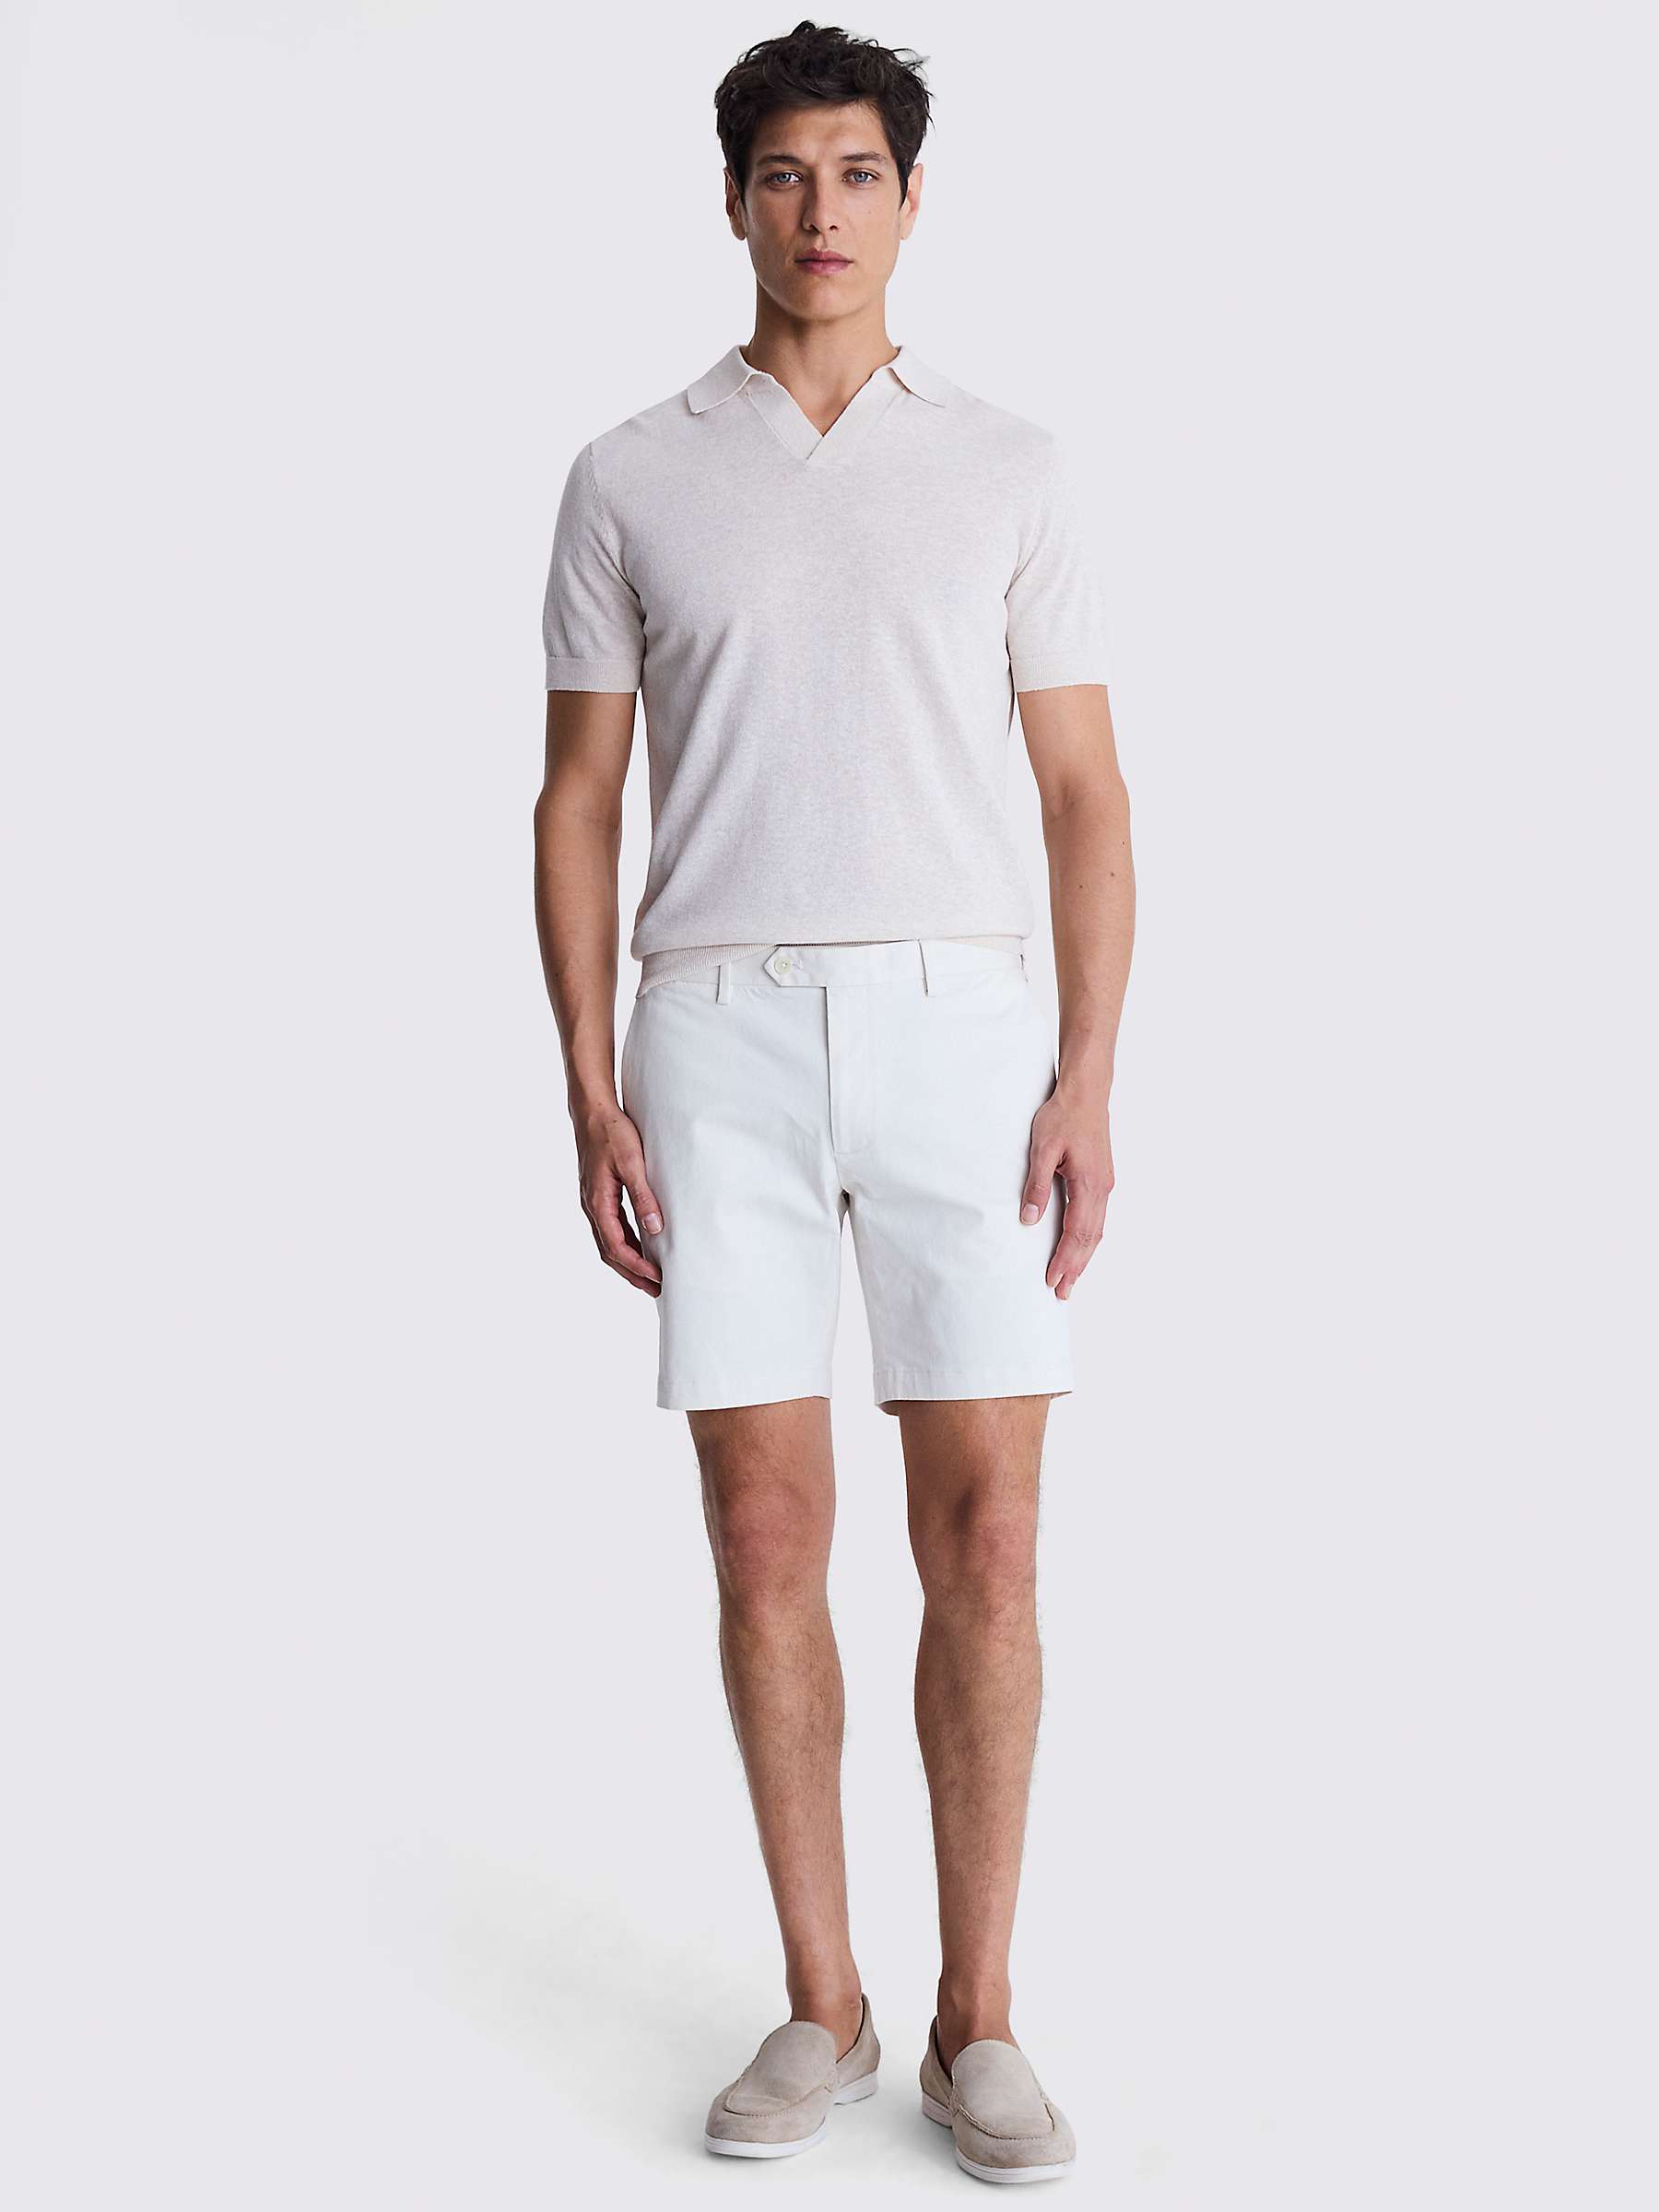 Buy Moss Slim Fit Chino Shorts Online at johnlewis.com